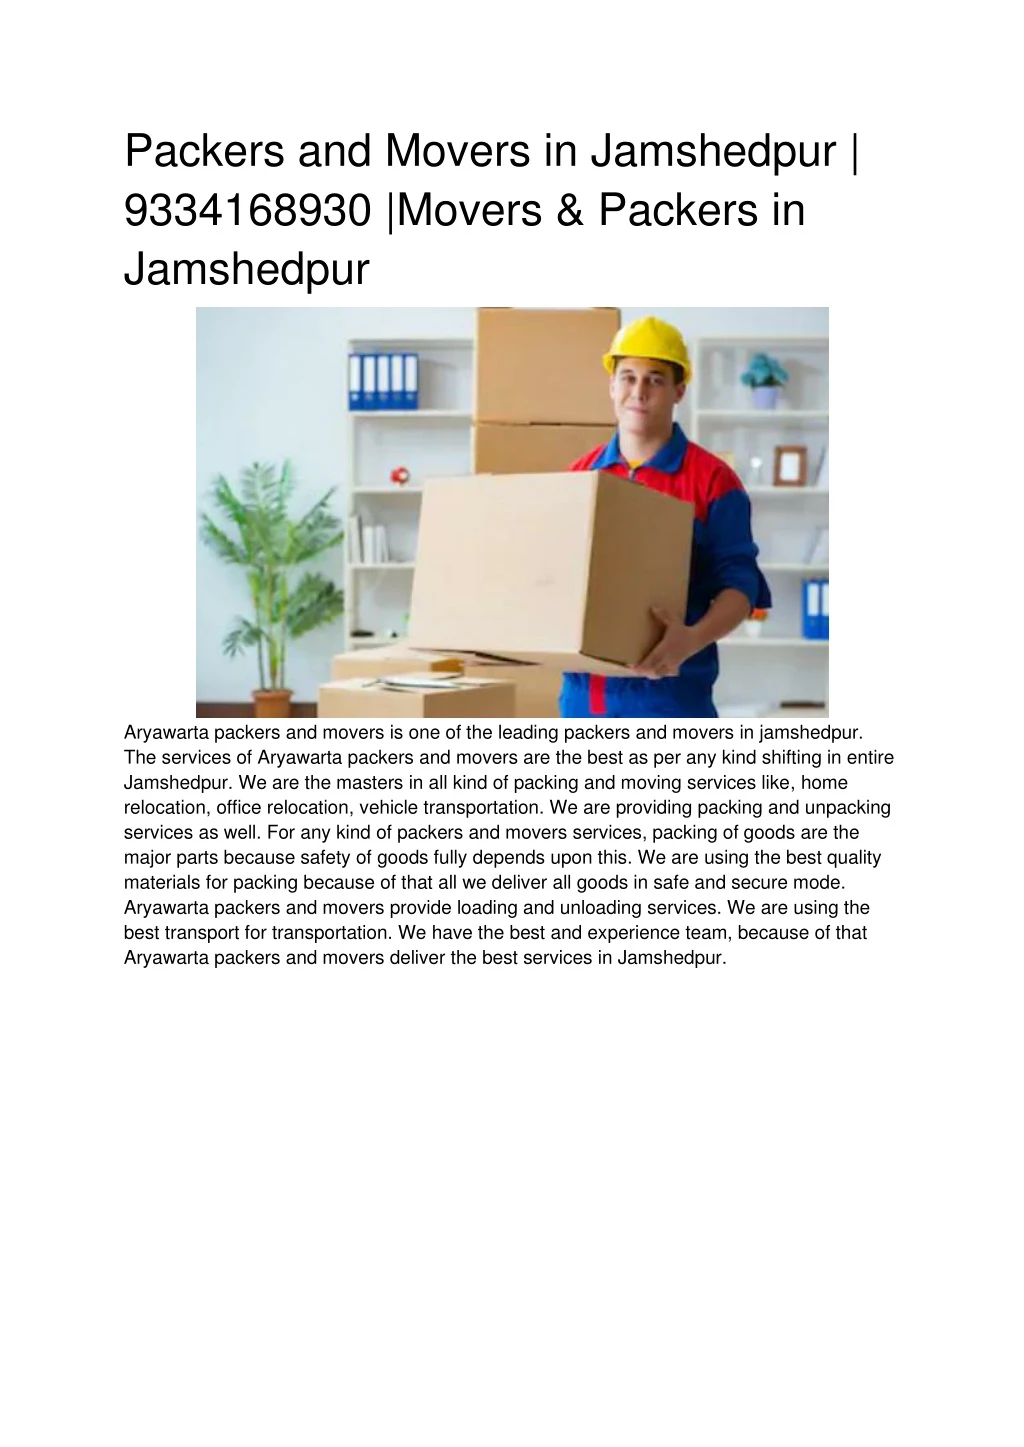 packers and movers in jamshedpur 9334168930